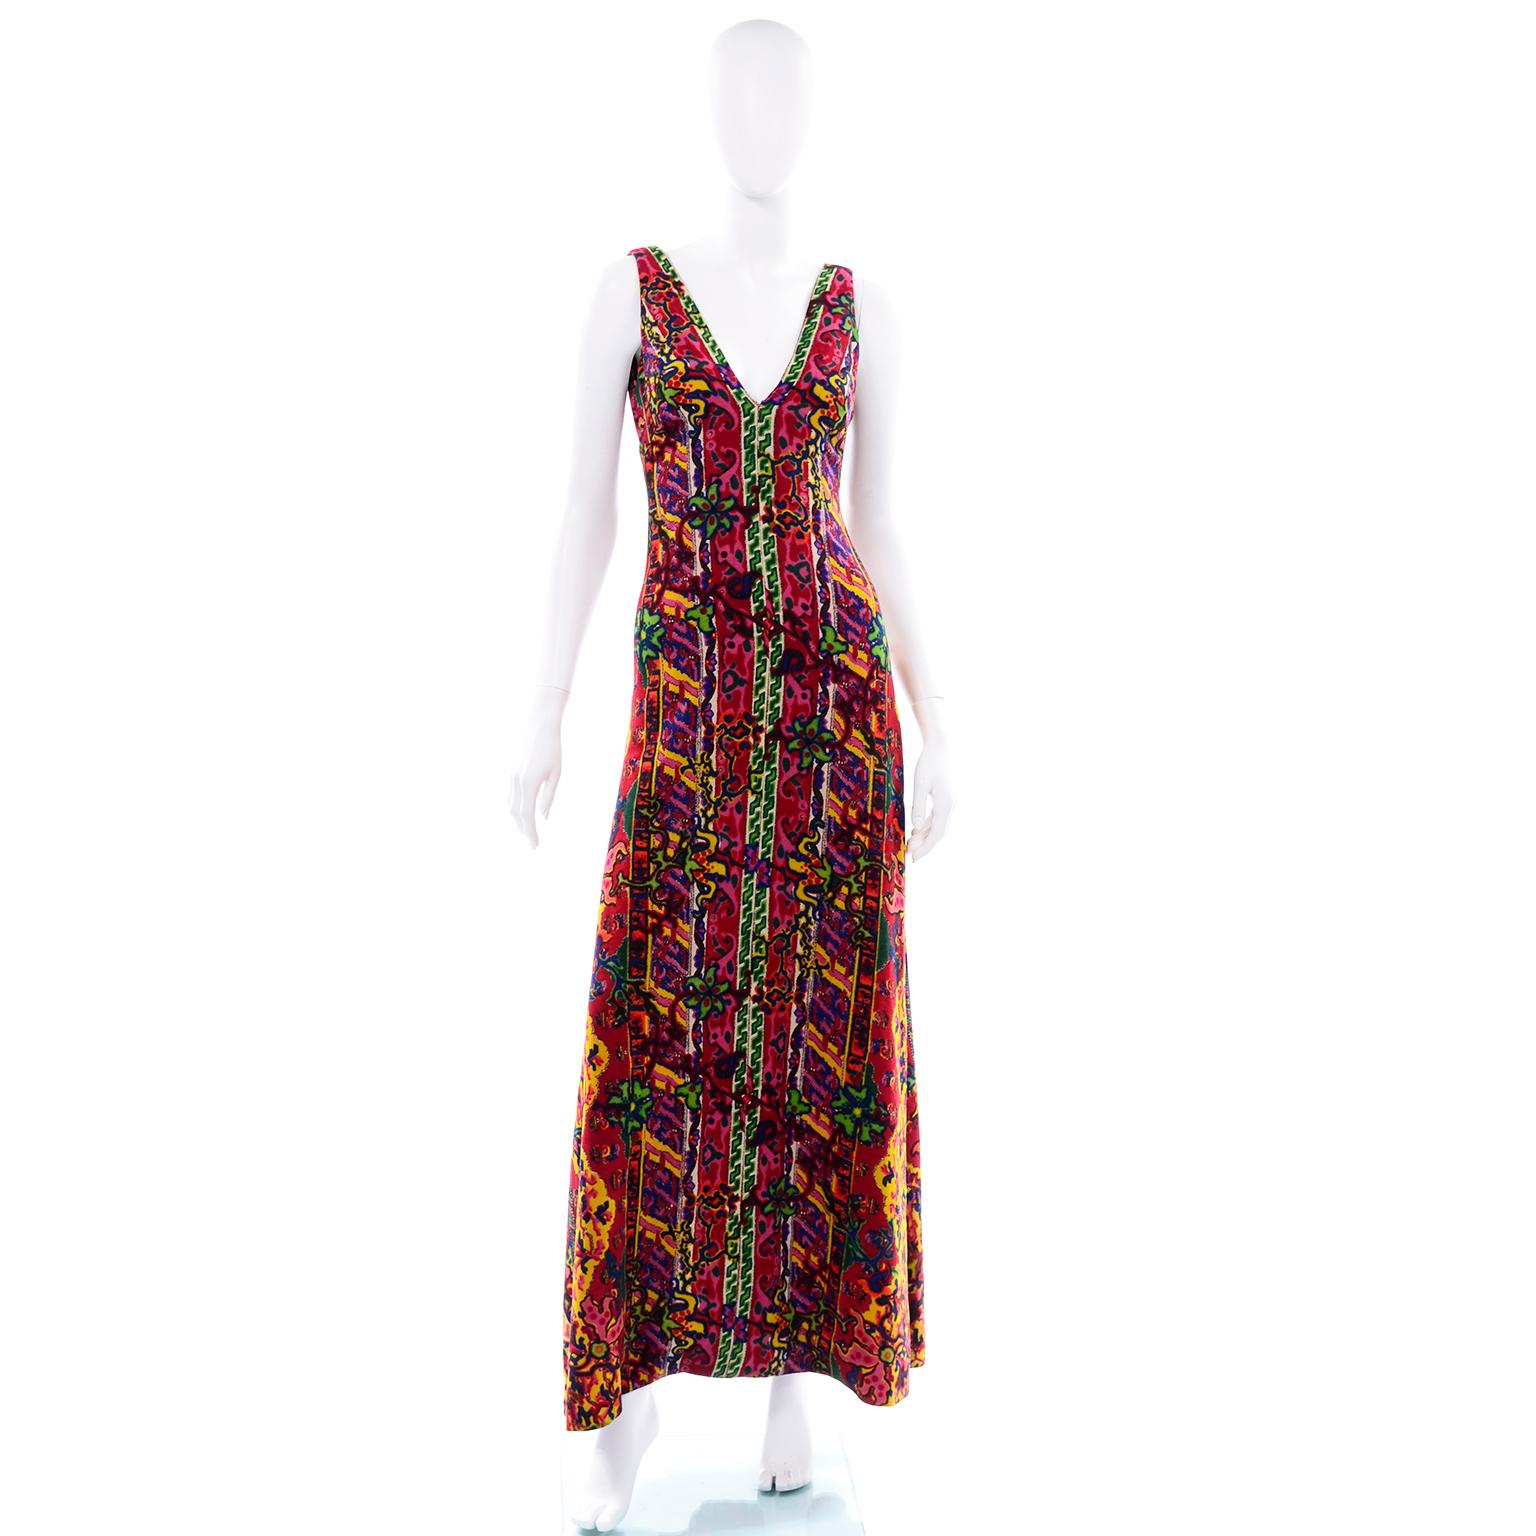 This is an exceptional vintage 1970's maxi dress from Bendel's Studio. The dress is in a woven textured paisley fabric in shades of pink, red, green, yellow, blue, white and burgundy. The dress is sleeveless with a v neck and low v back. The iconic